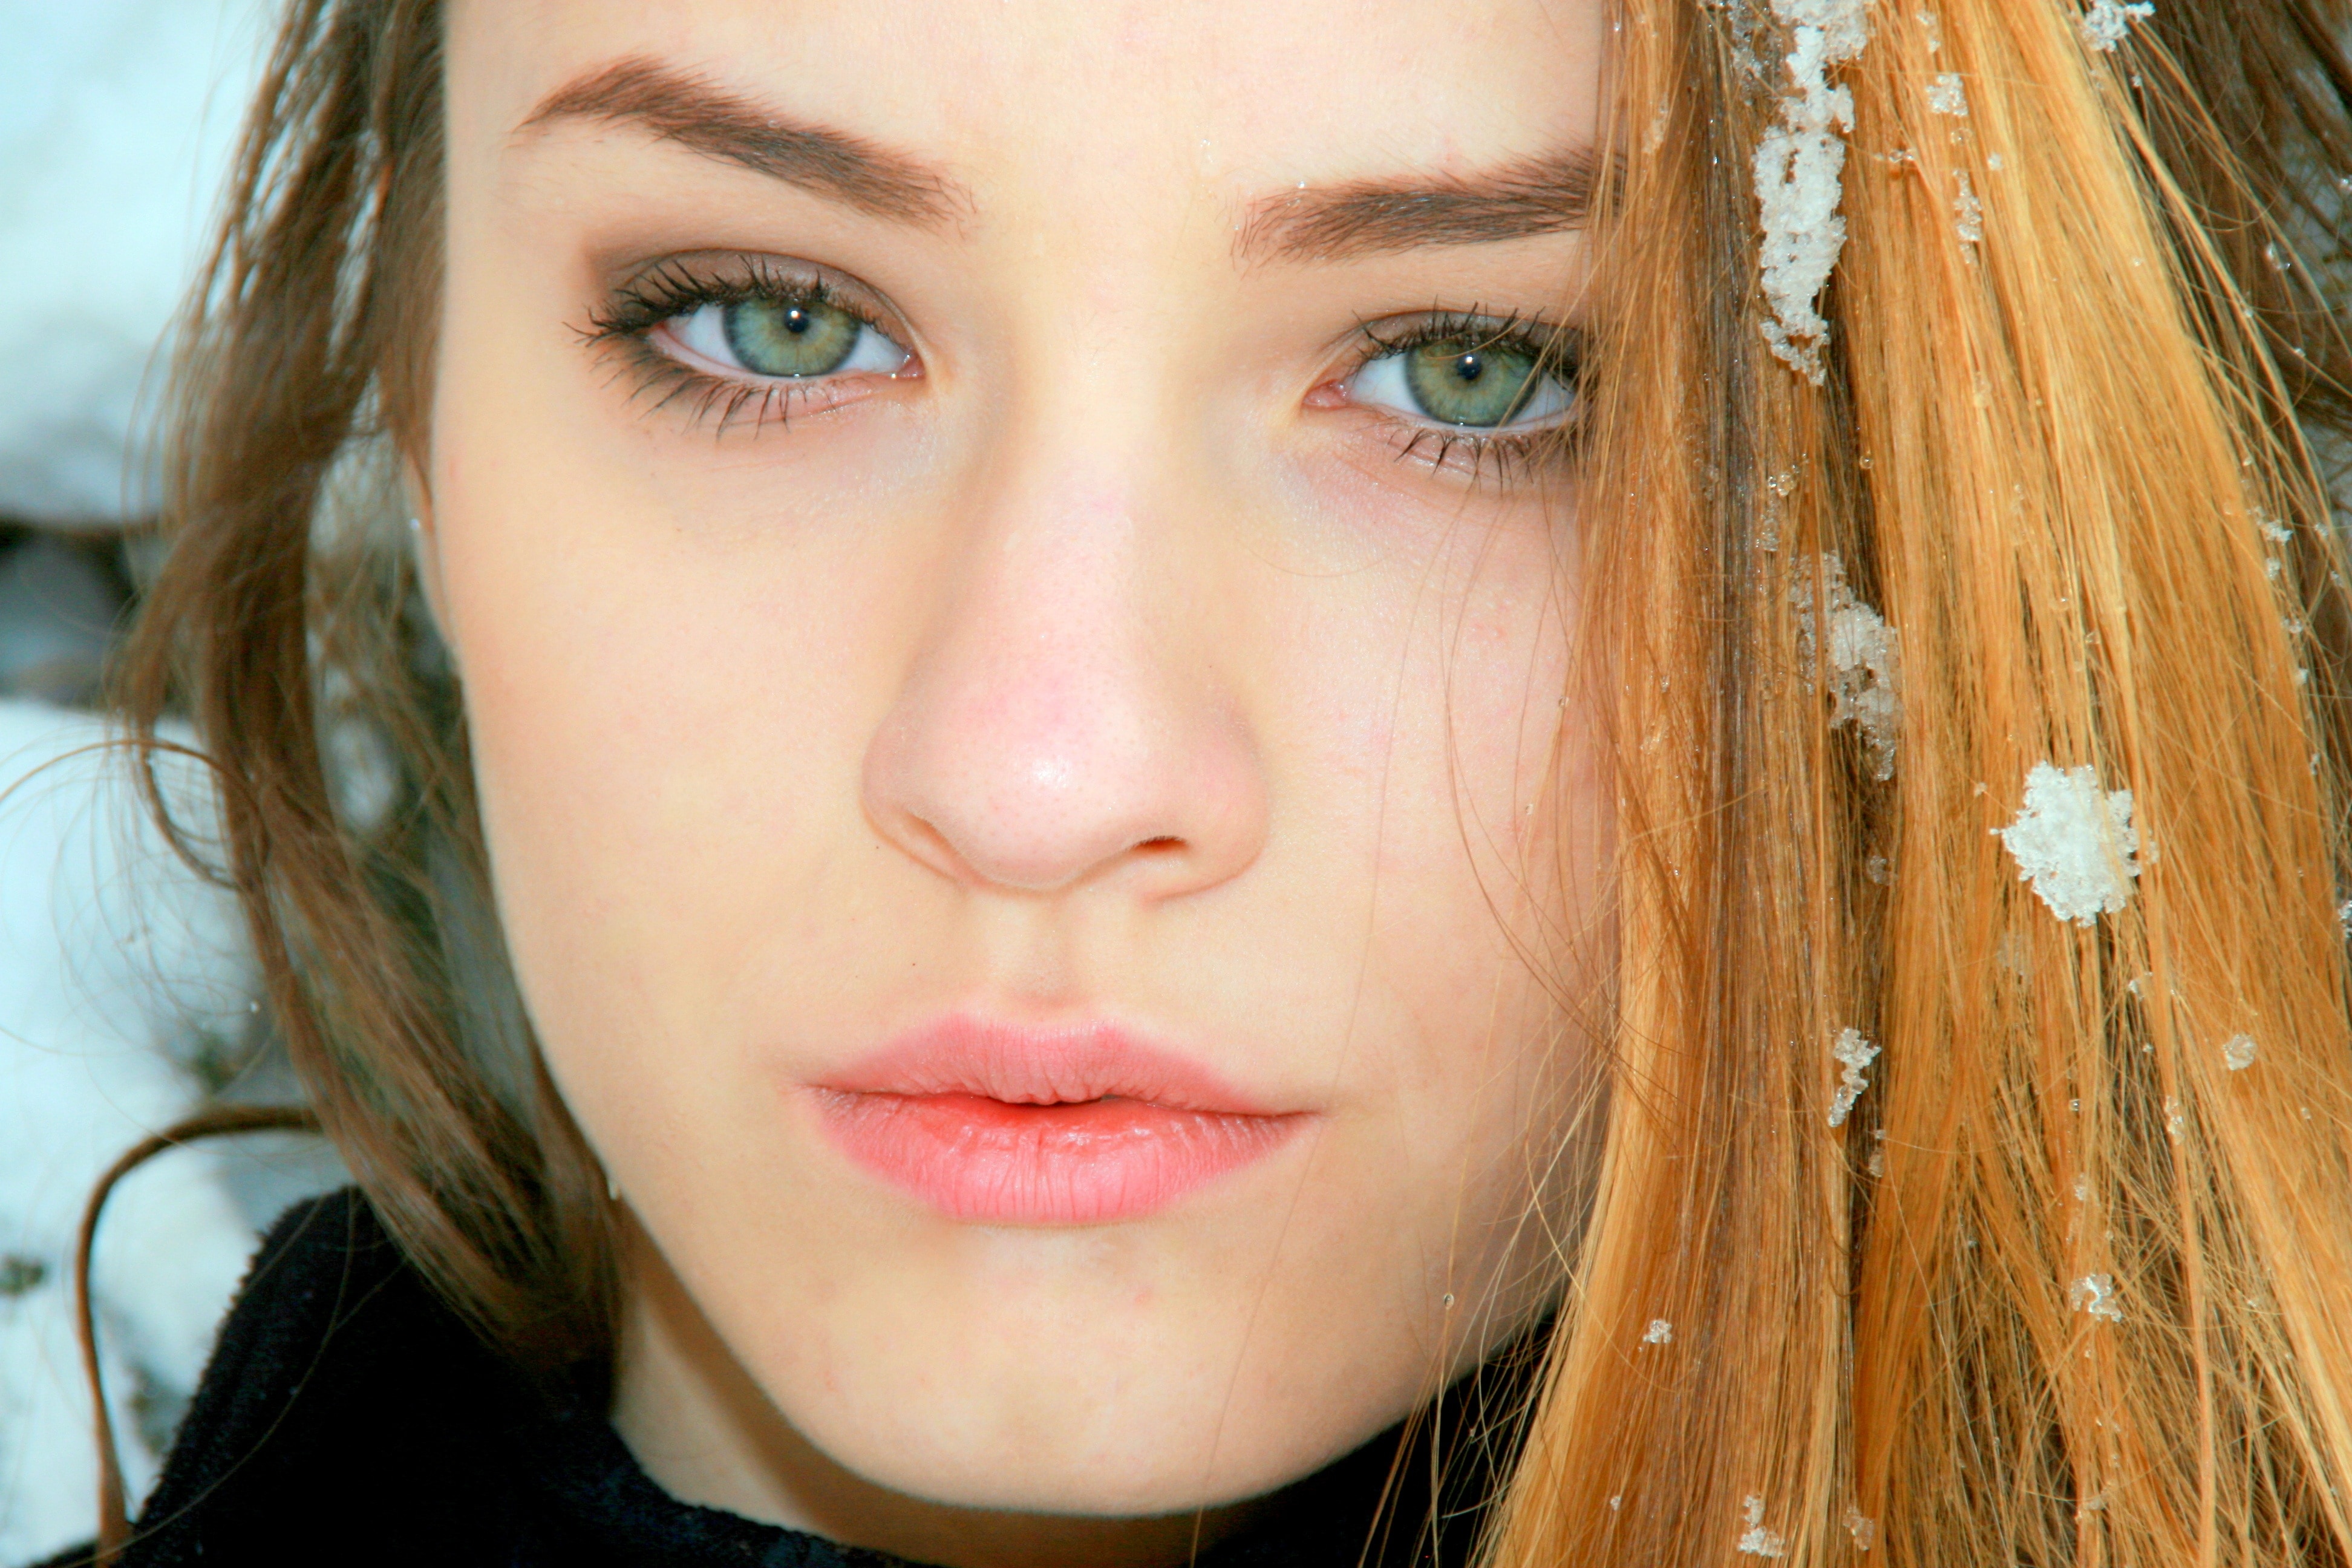 Green Eyes, Snow, Blonde, Portrait, Girl, sadness, one person